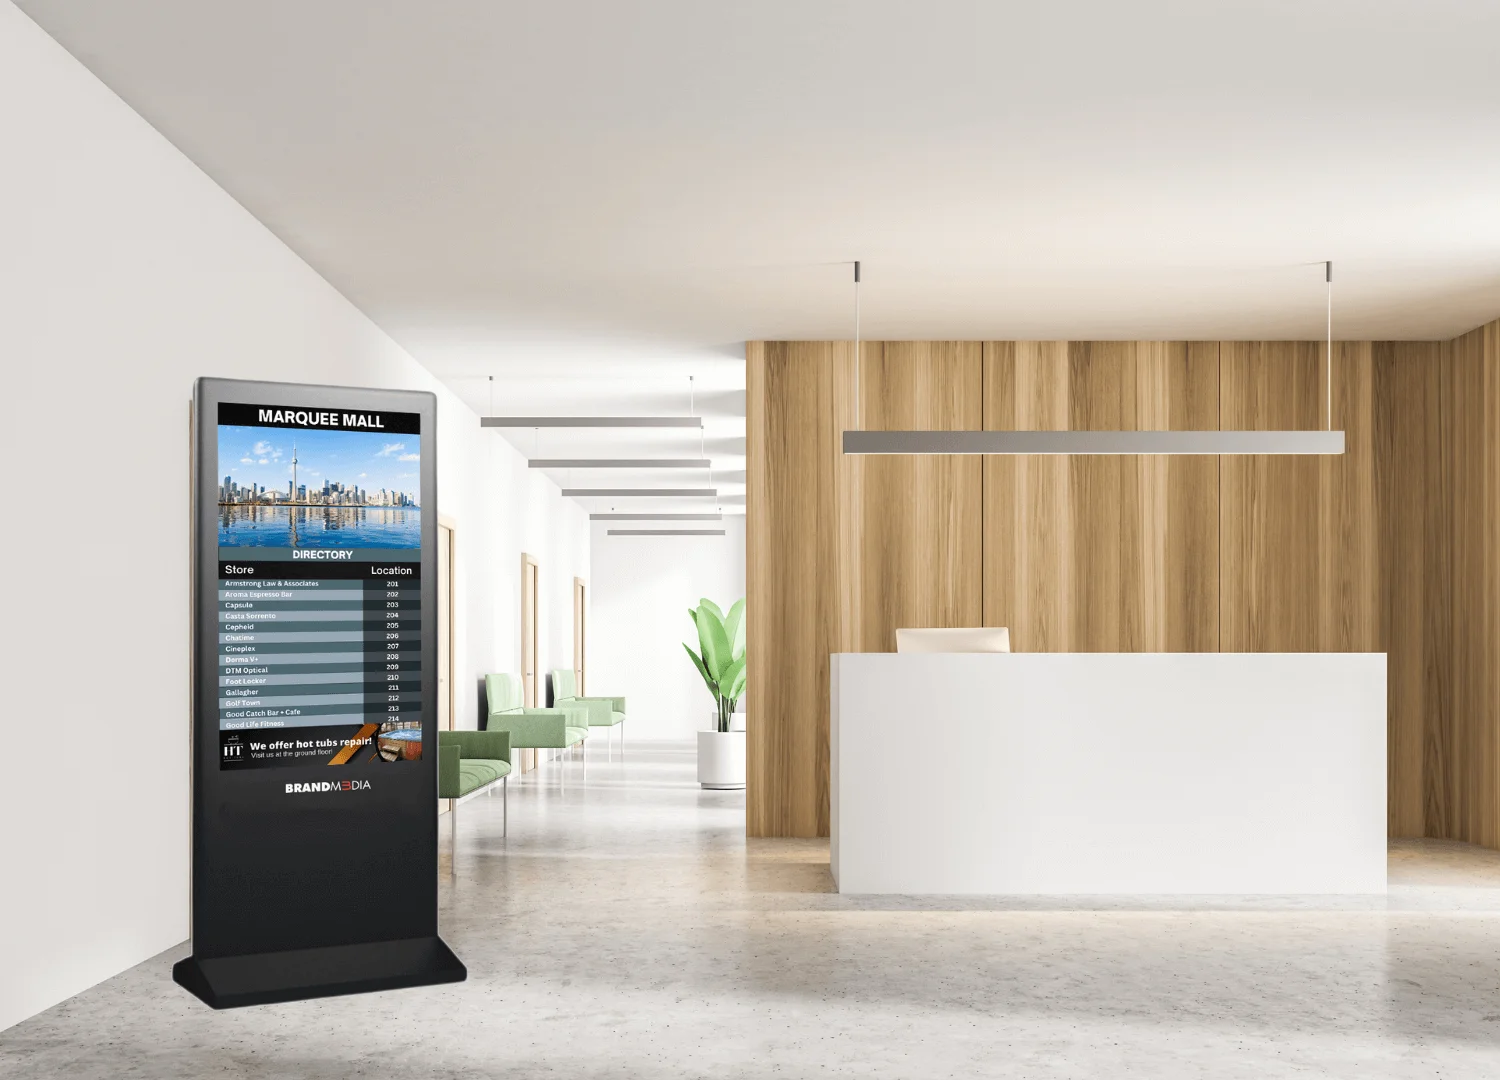 Empowering real-time franchise applications through smart kiosk technology